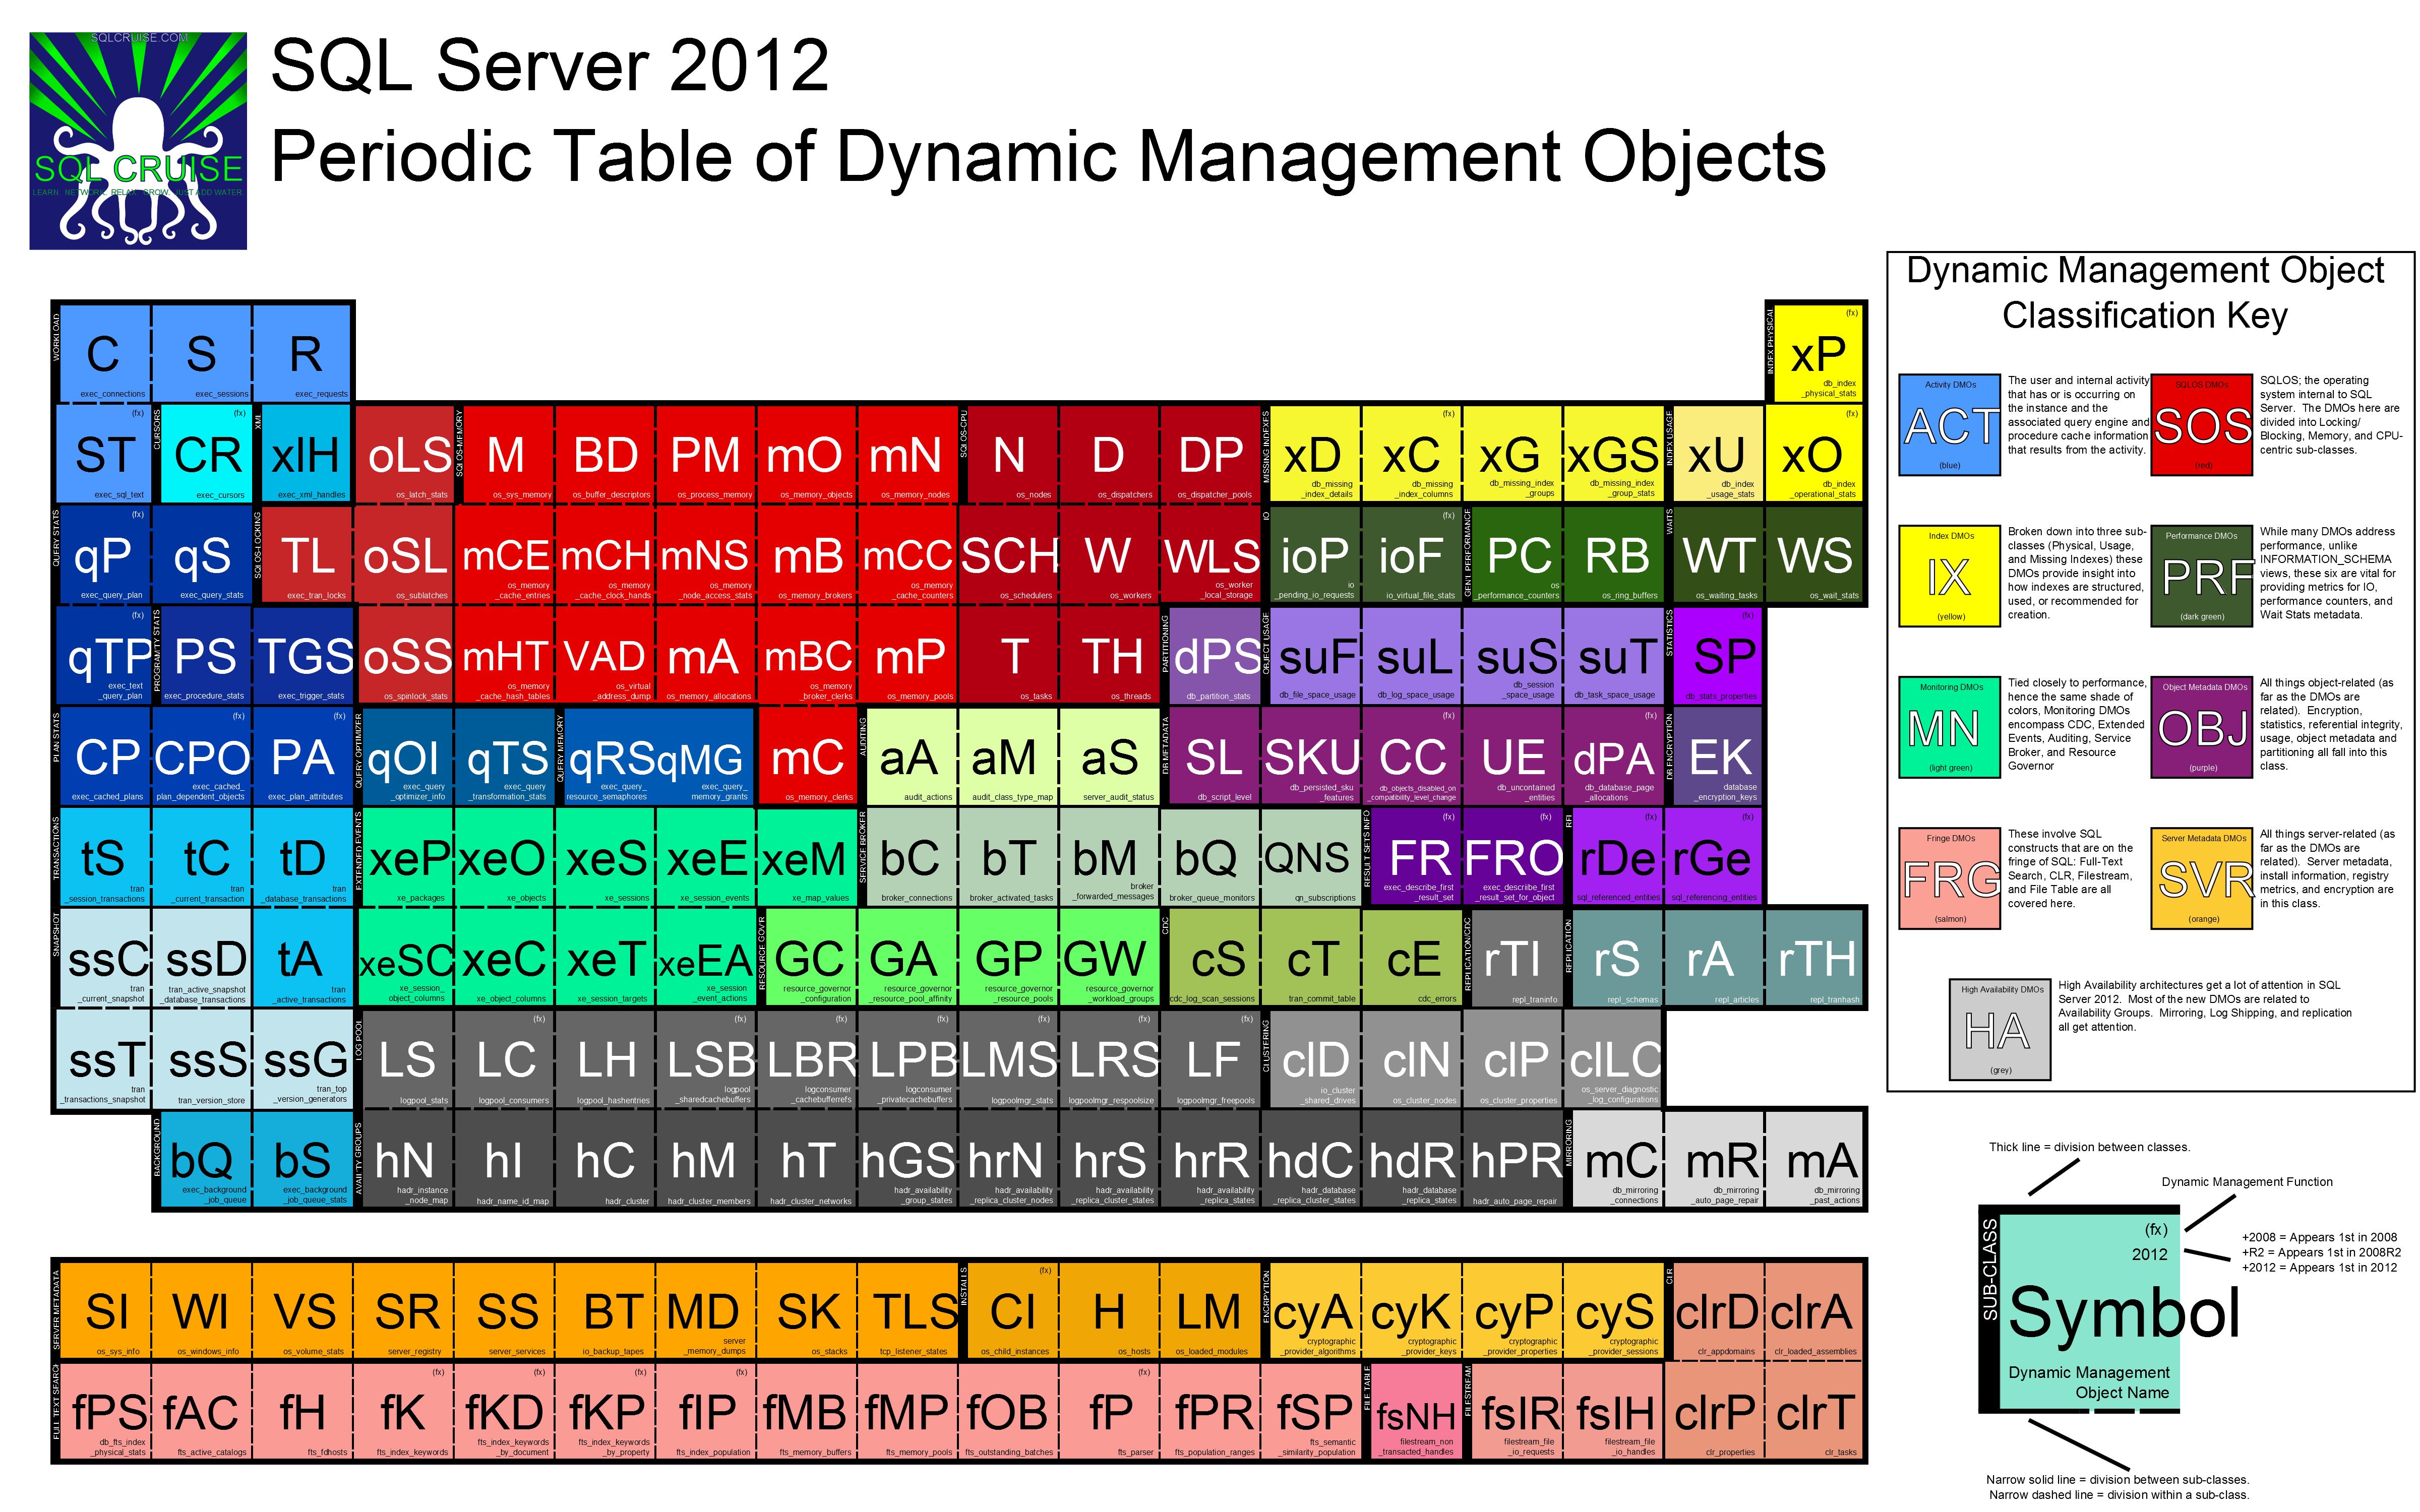 The SQL Server 2012 Periodic Table of Dynamic Management Objects the